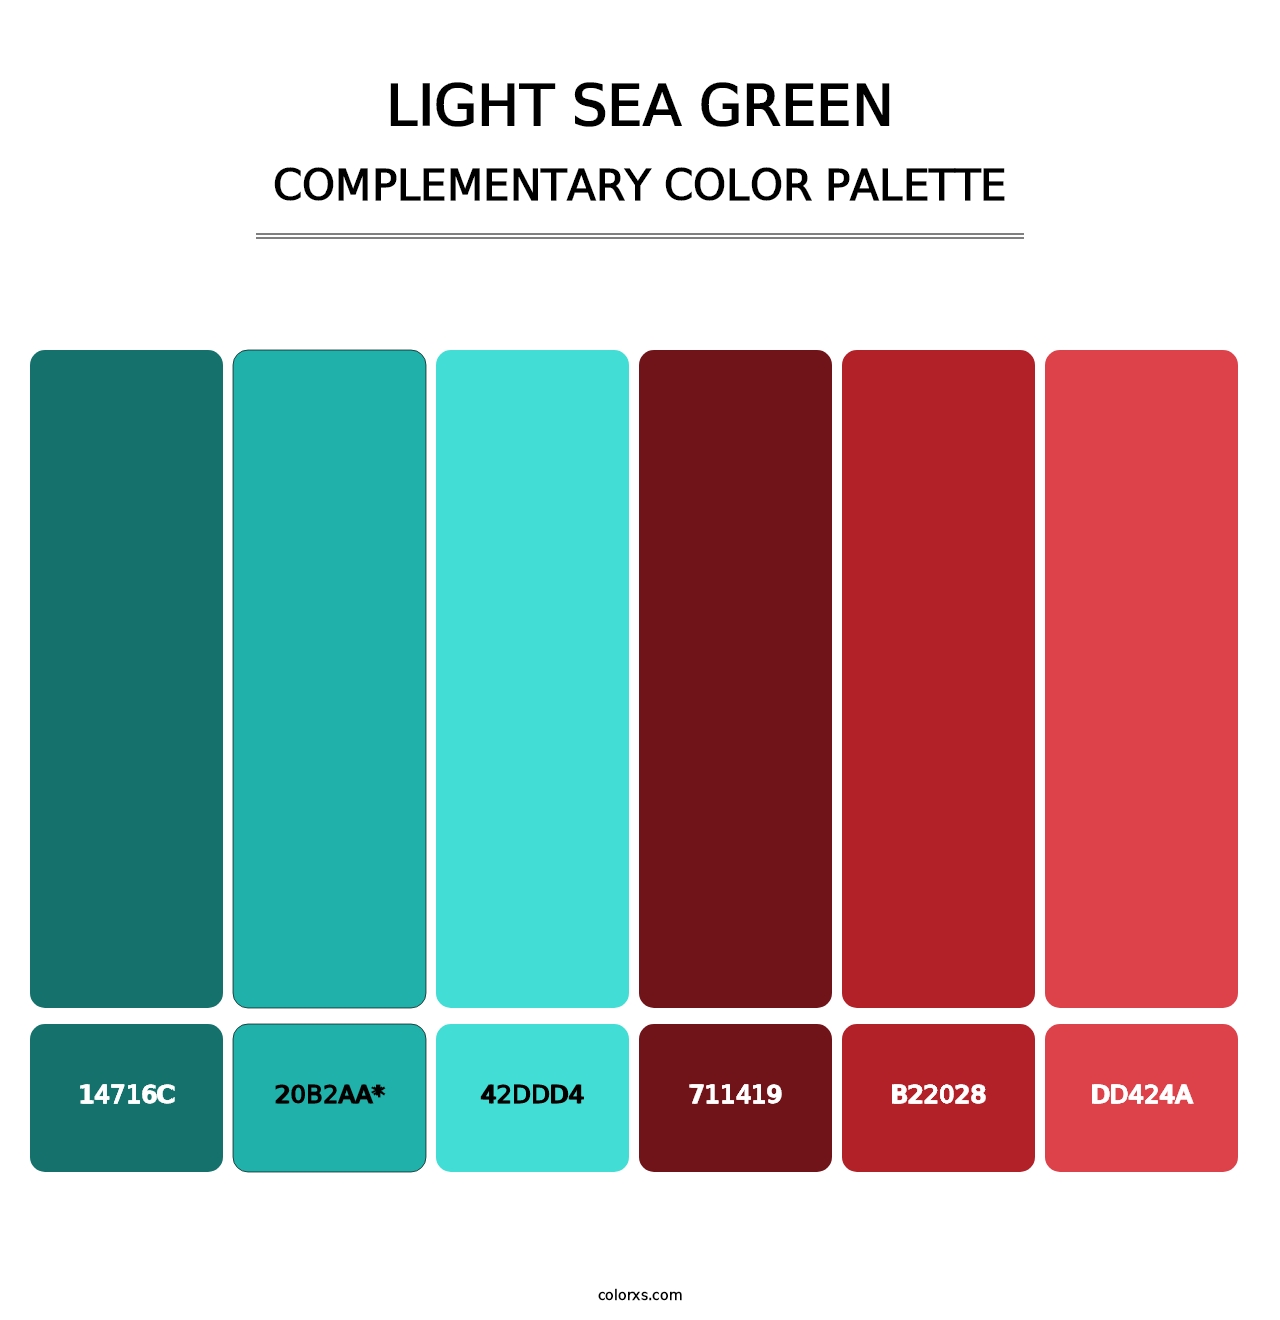 Light Sea Green - Complementary Color Palette